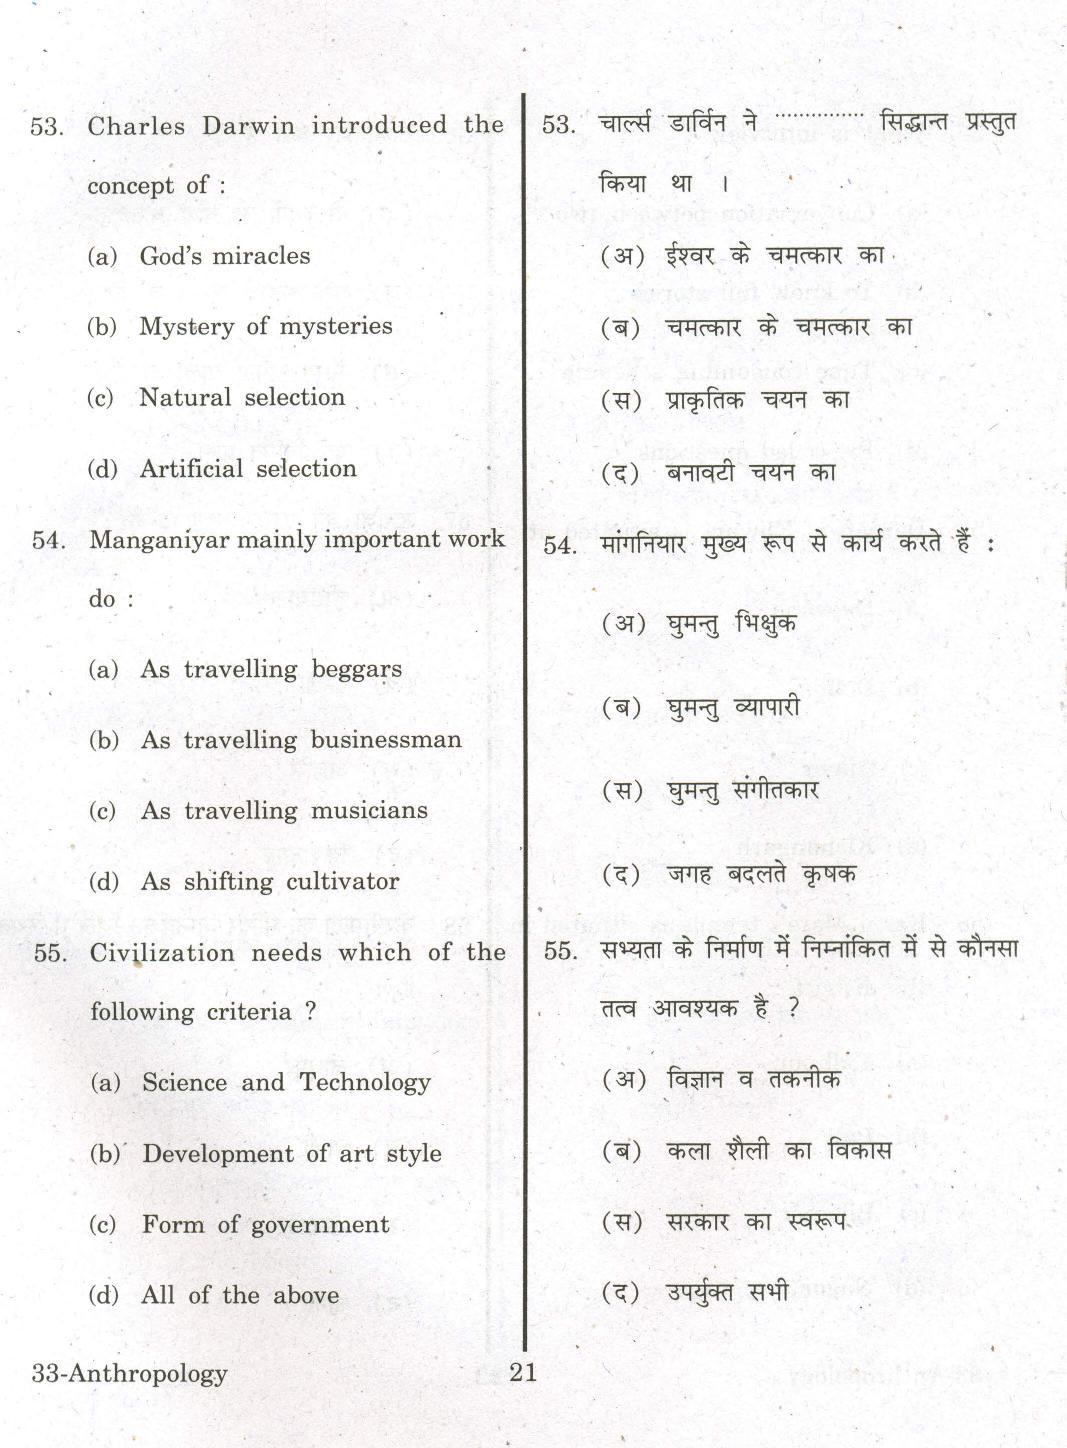 URATPG Anthropology 2013 Question Paper - Page 20